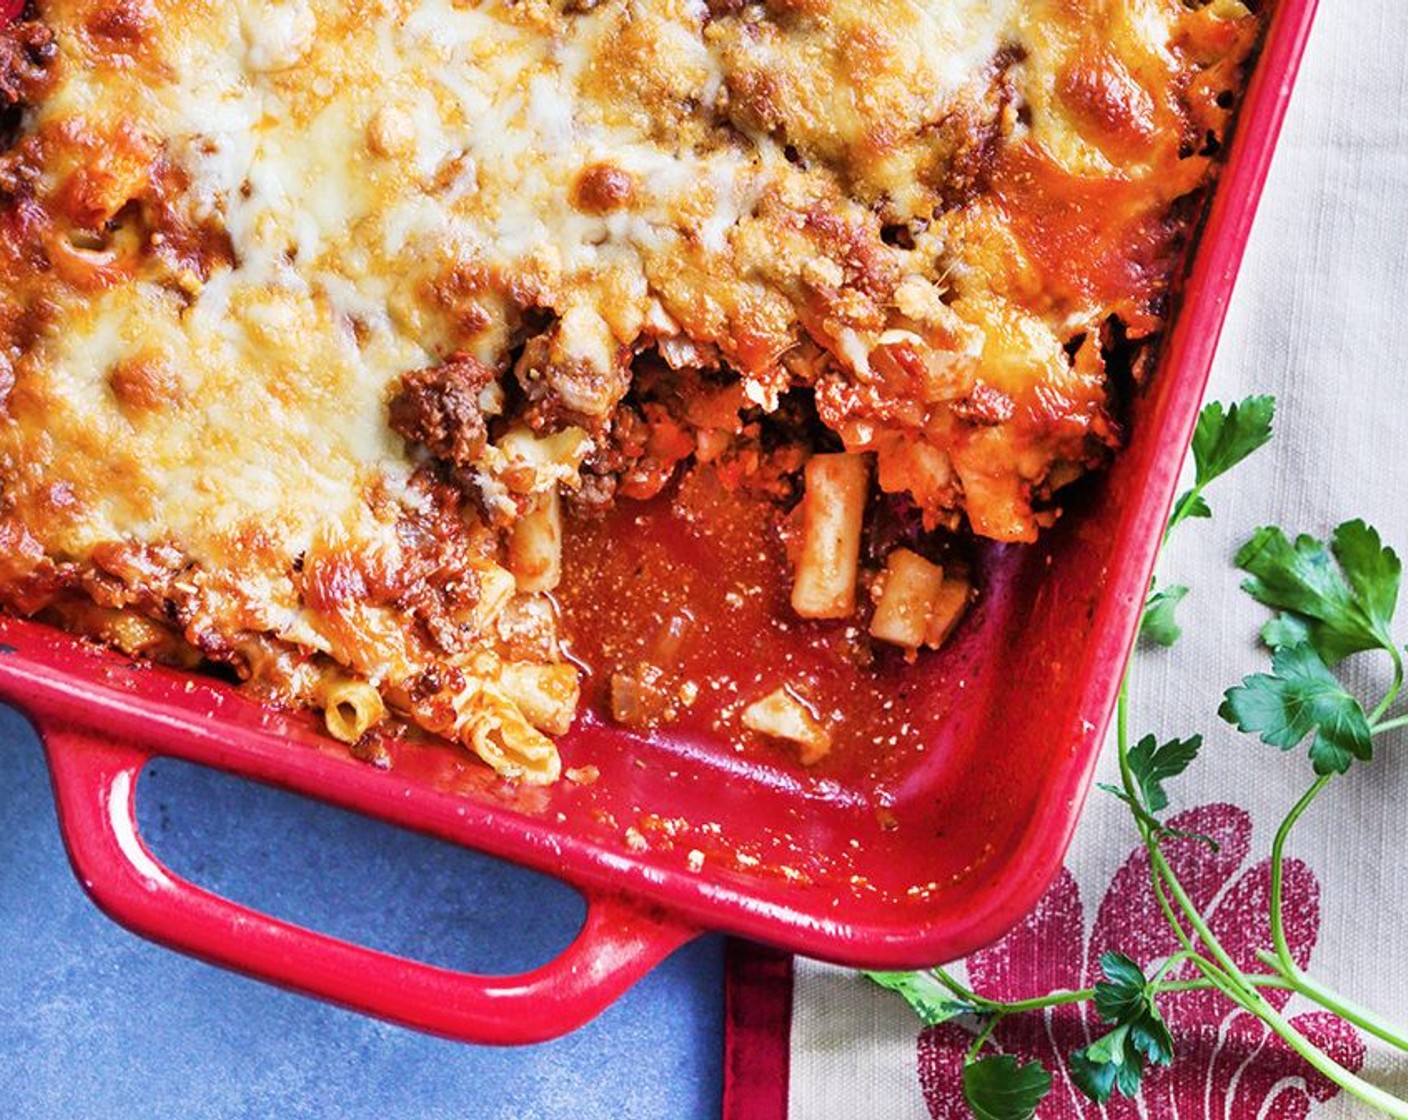 Baked Ziti with Sour Cream